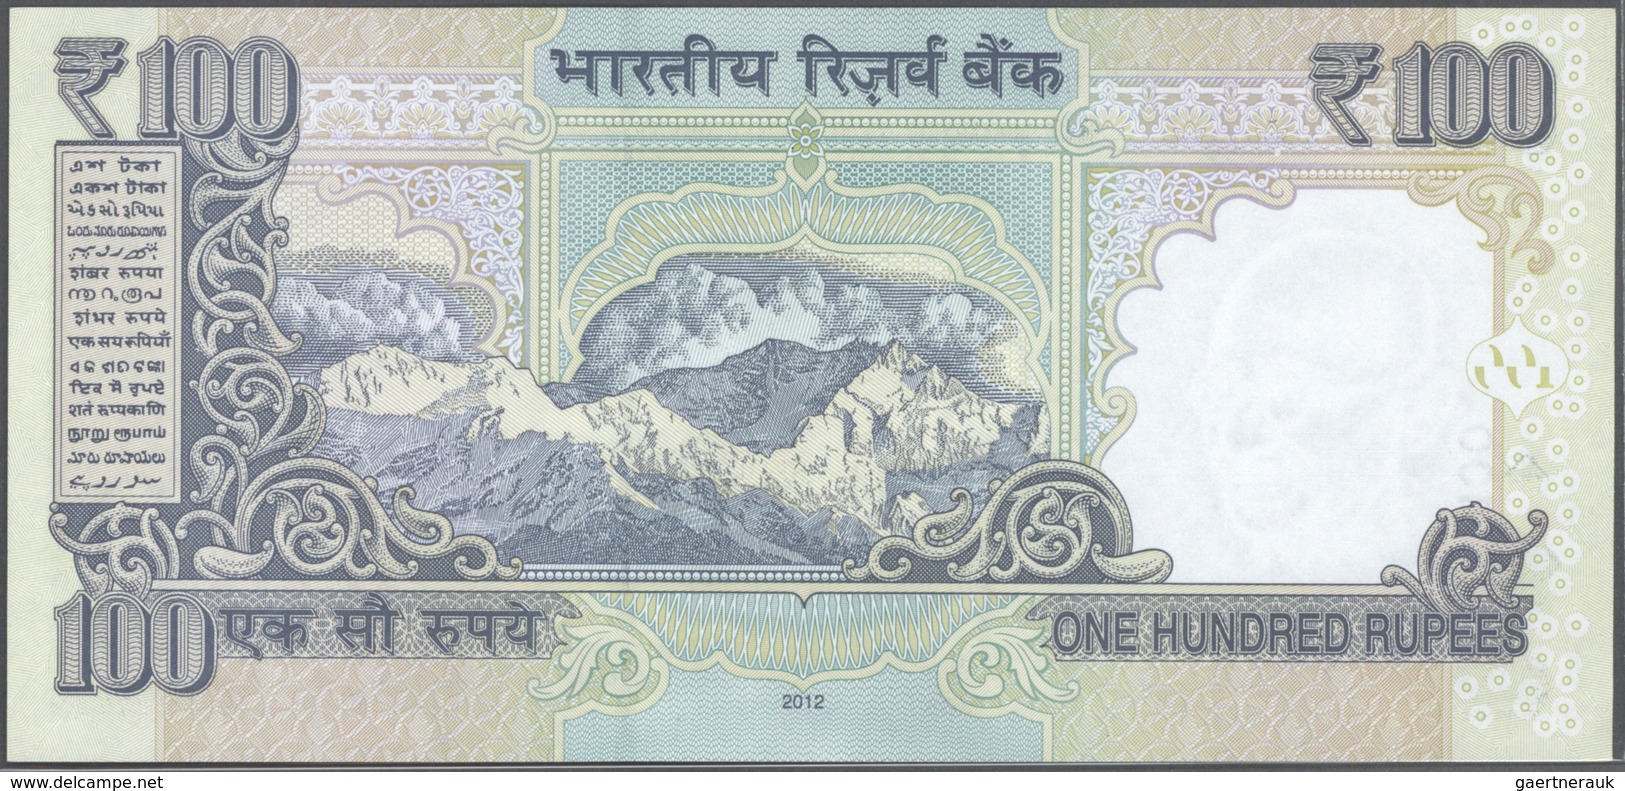 India / Indien: set of 10 notes 100 Rupees 2009 P. 98 all with interesting serial number containing: